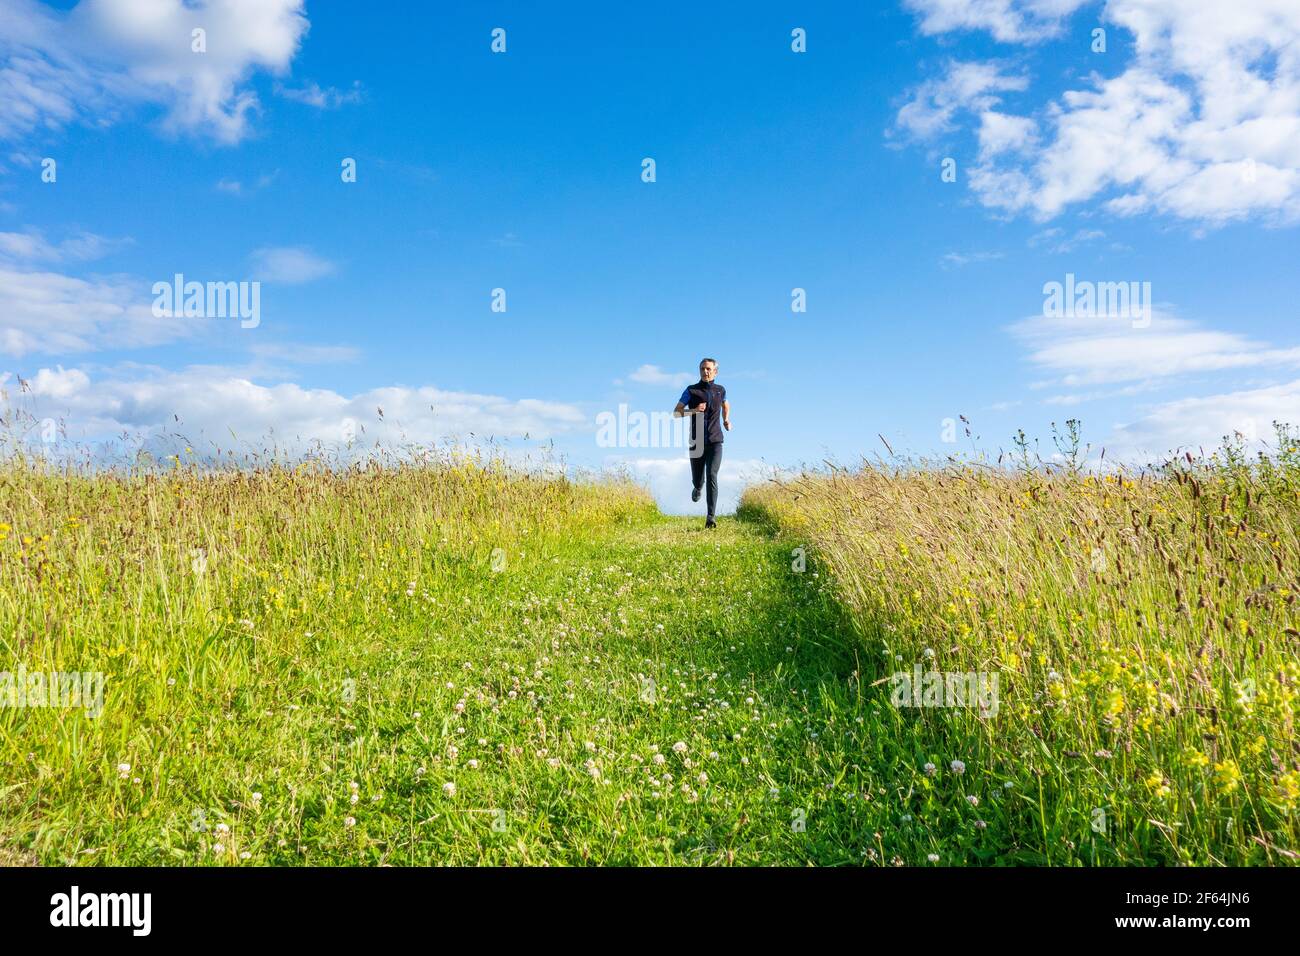 Mature man running, jogging downhill on grass footpath on hill in countryside. UK Stock Photo